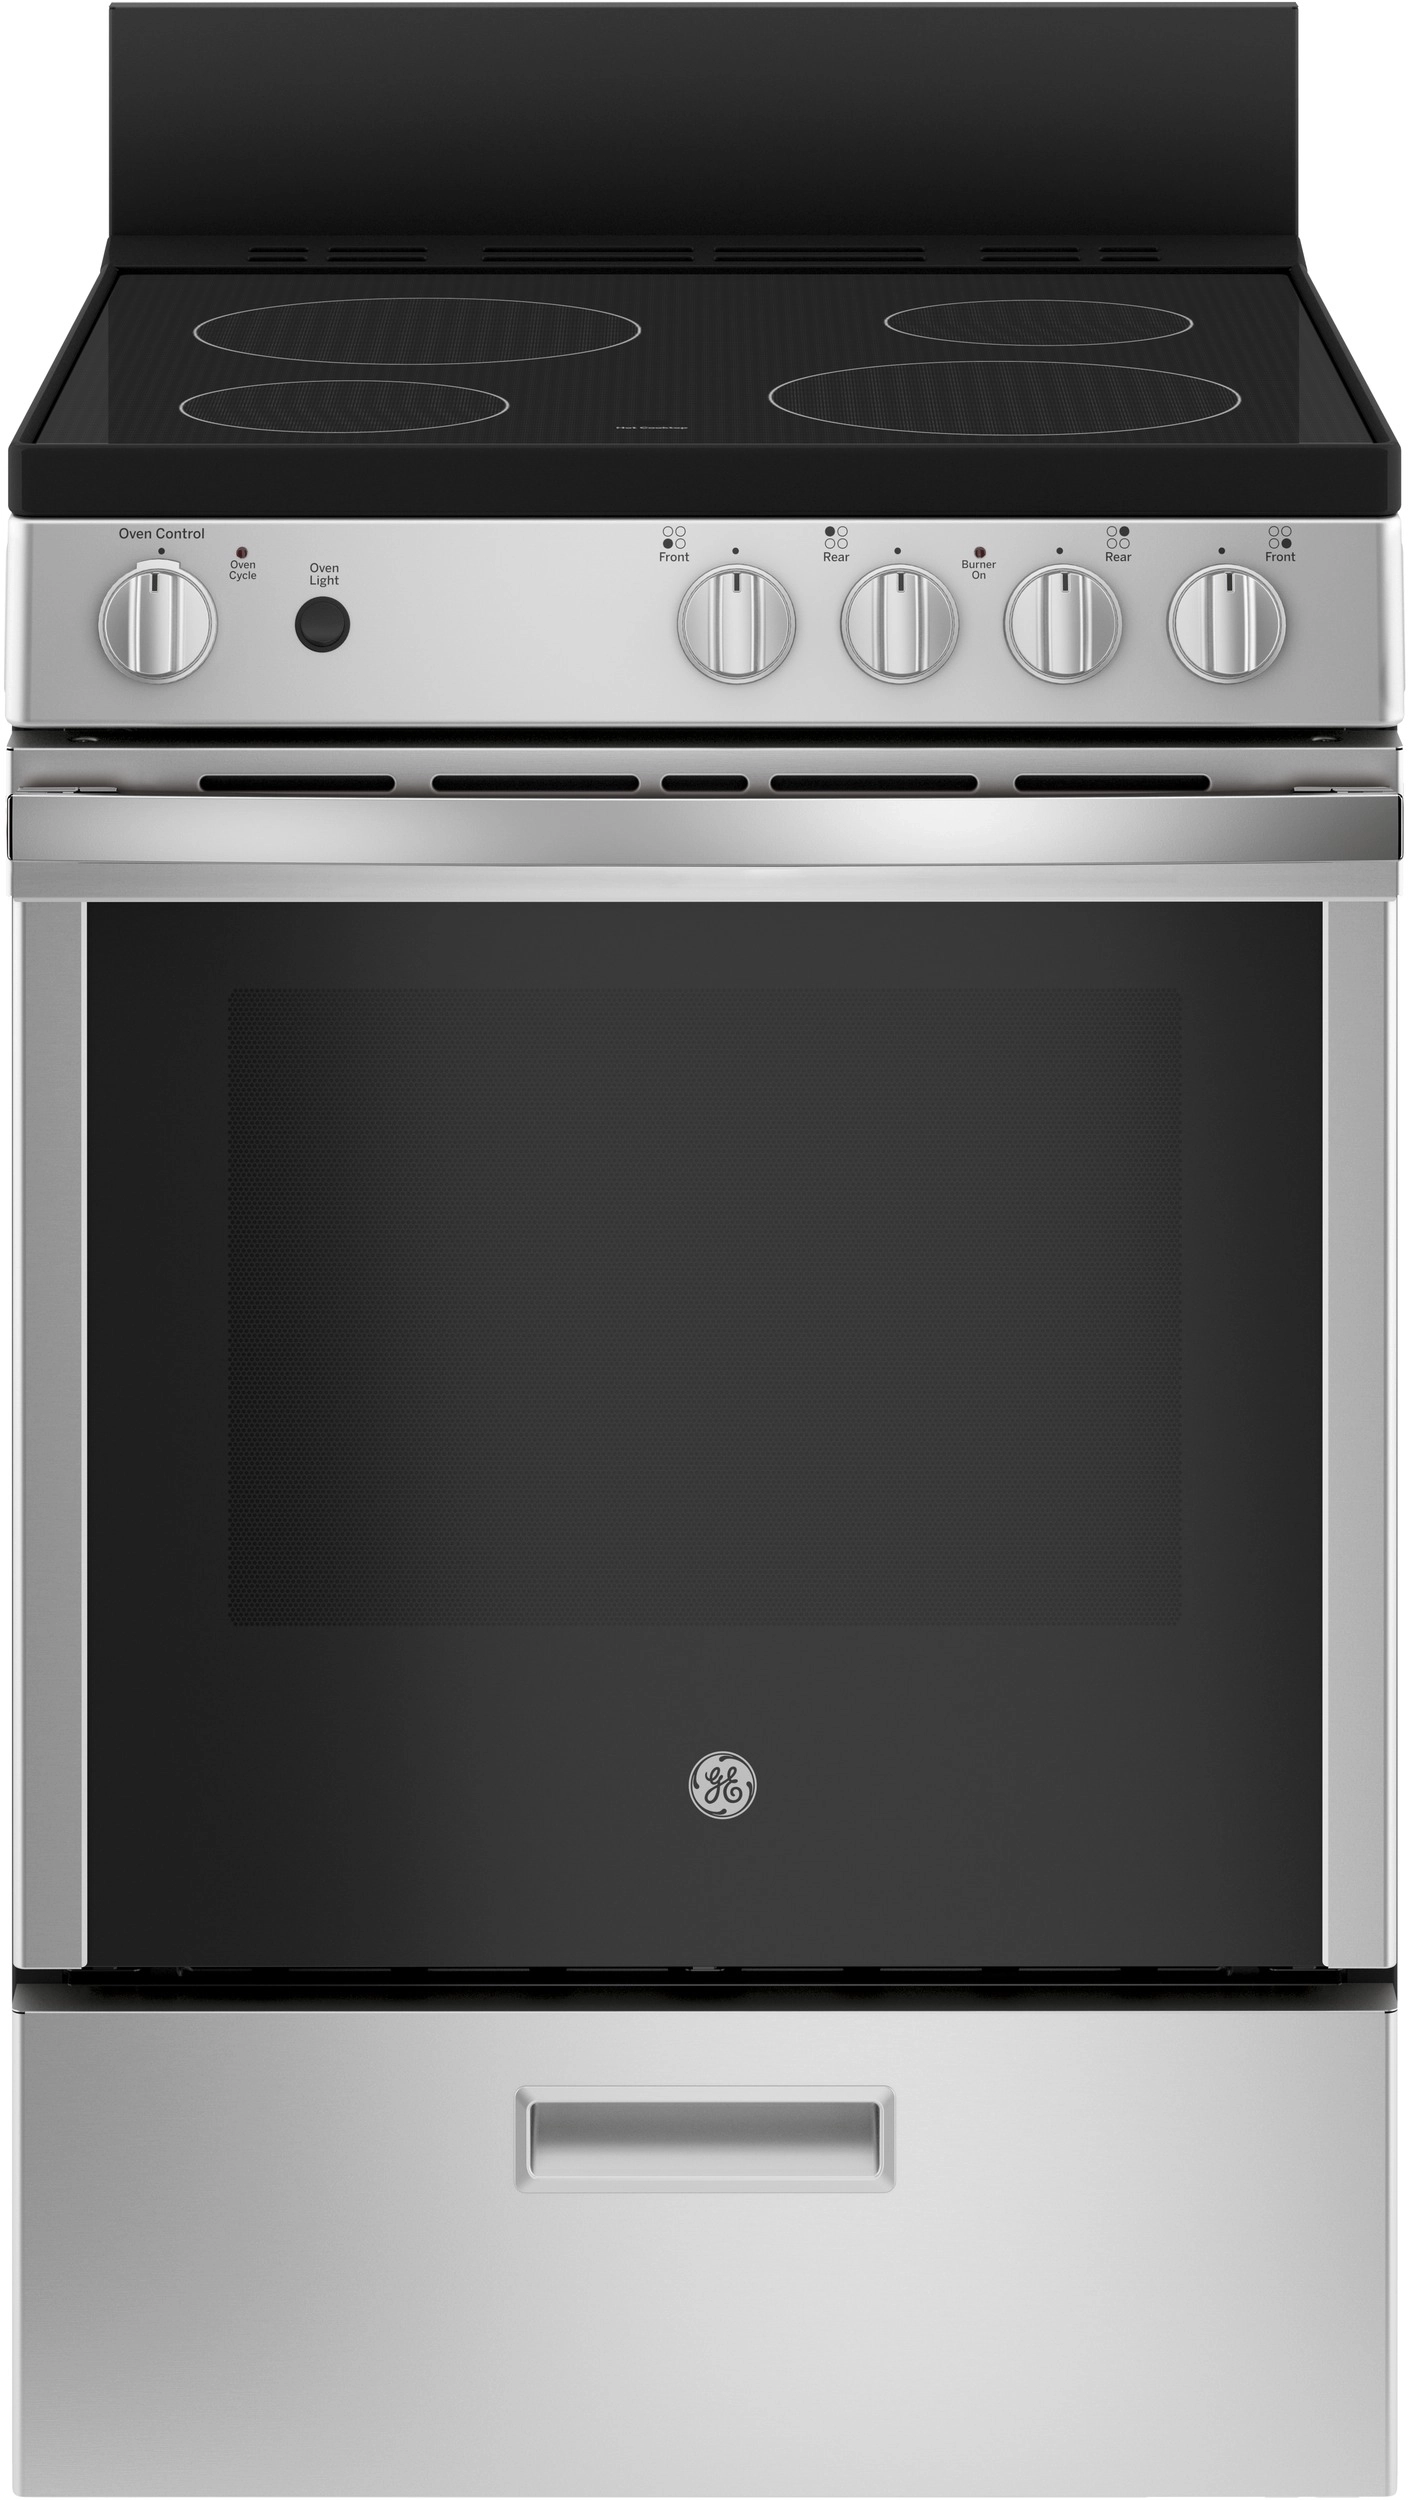 General Electric 24 Inch Freestanding Electric Range with 4 Radiant Smoothtop Burner